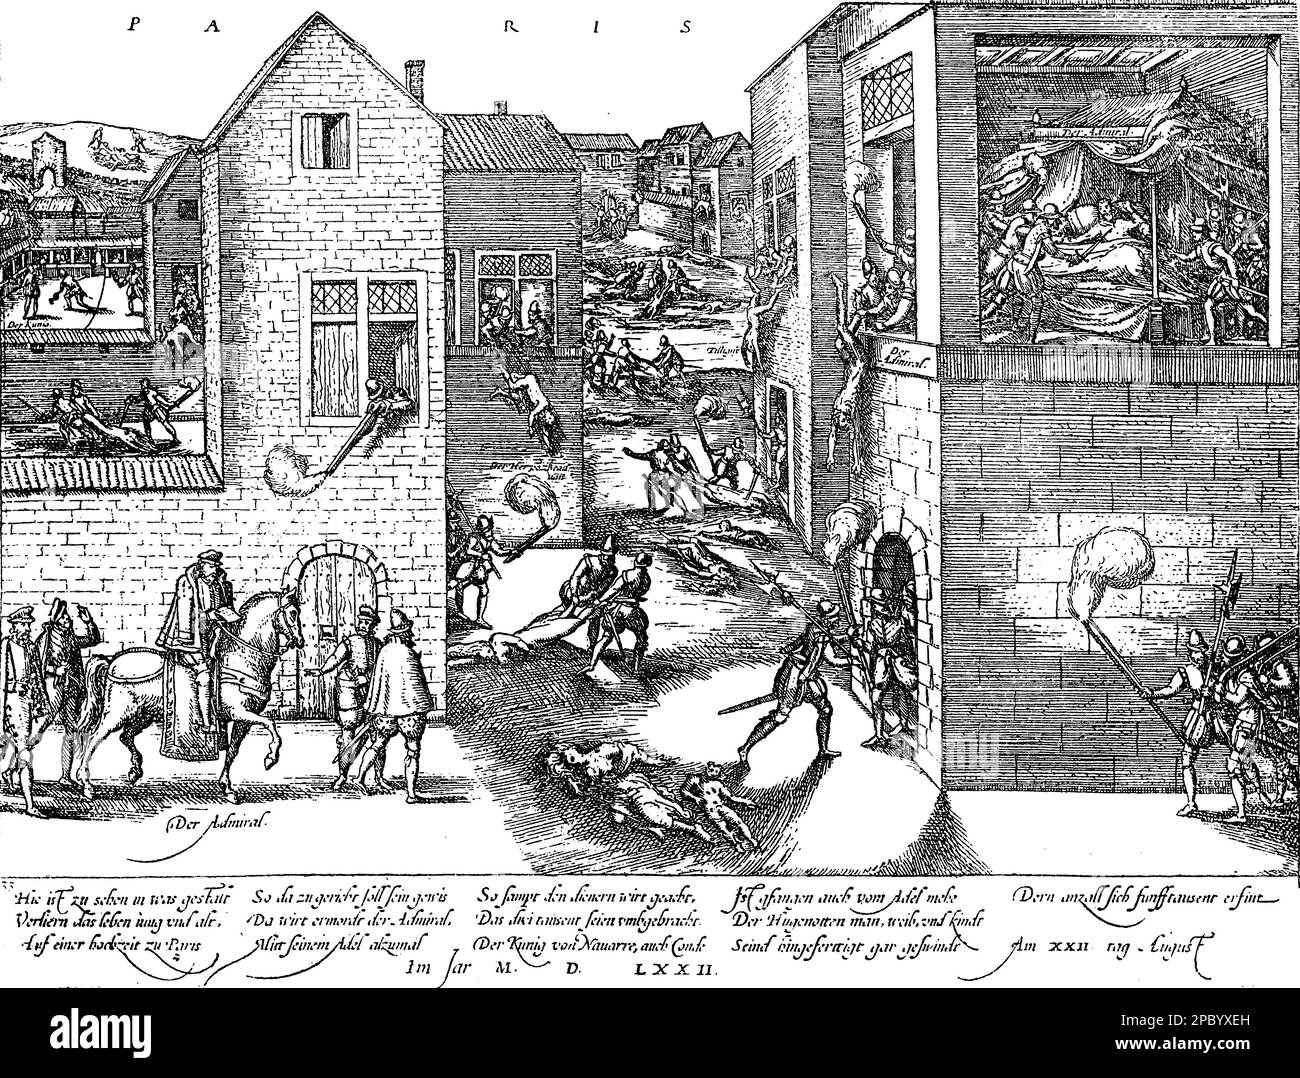 The St. Bartholomew's Day massacre was a series of targeted killings and mob violence against French Protestants (Huguenots) in August 1572, resulting in thousands of deaths. It was a turning point in the French Wars of Religion and has been widely condemned as a horrific act of religious intolerance and violence Stock Photo